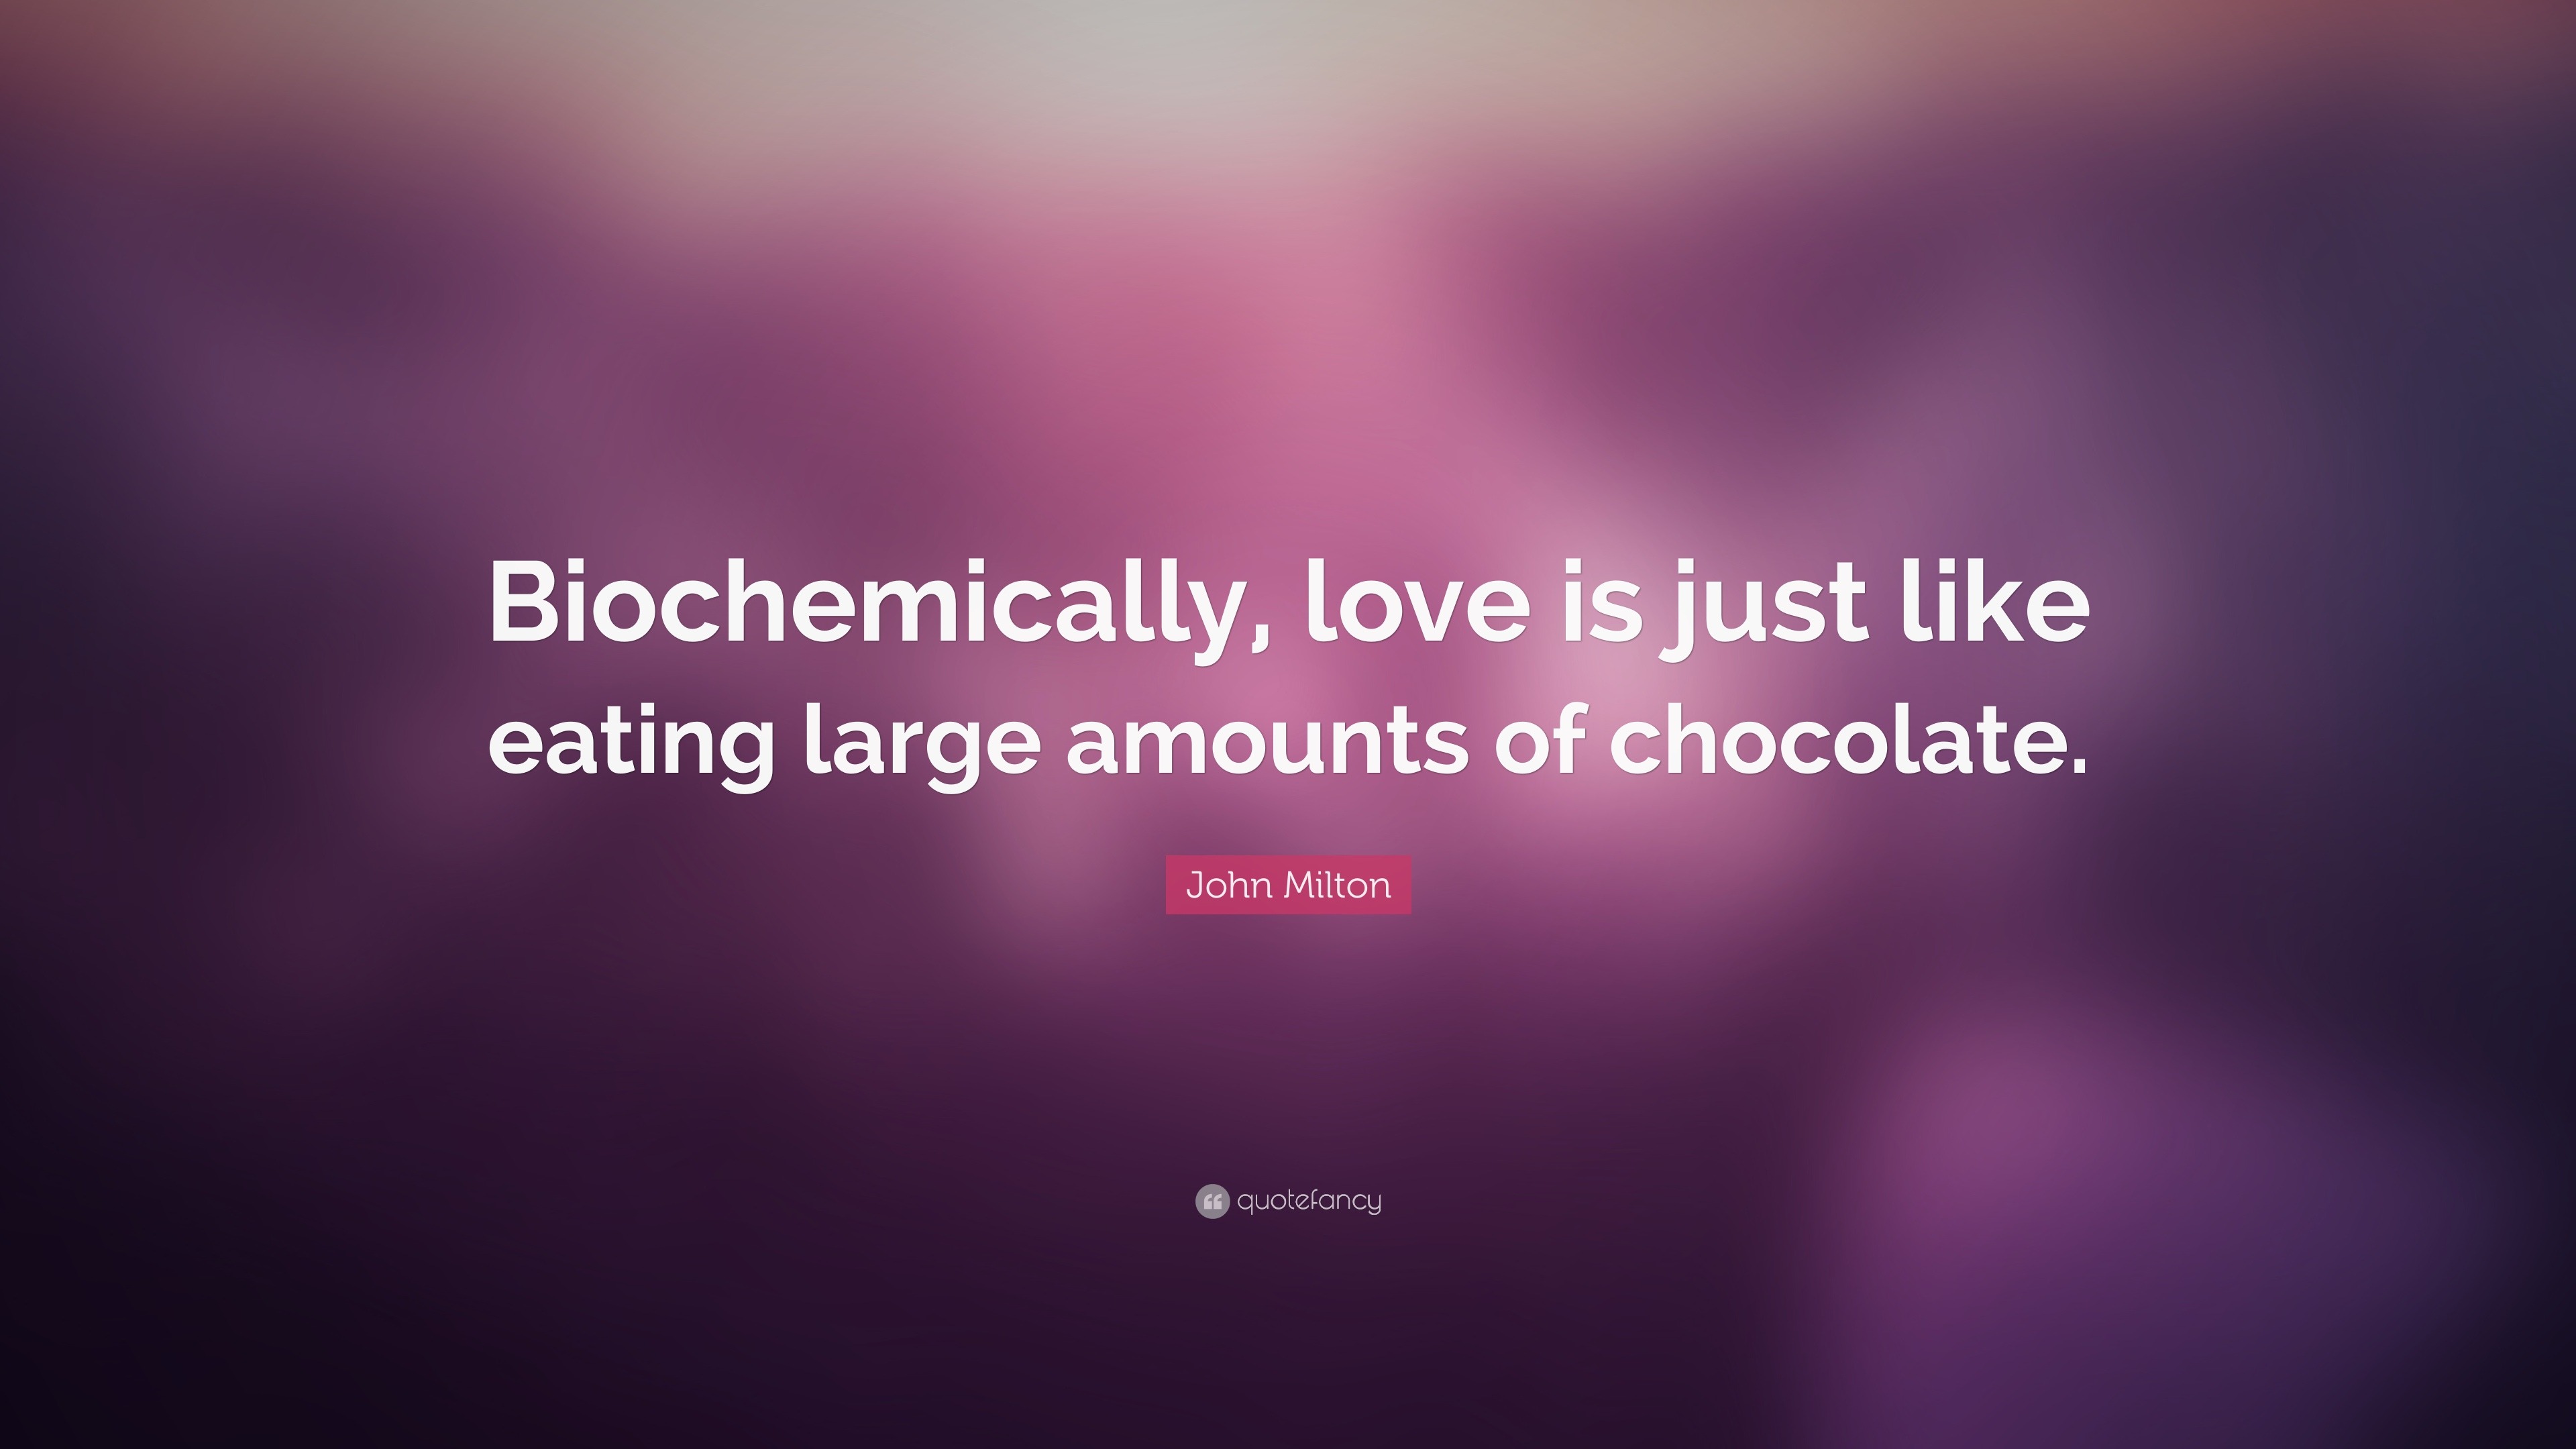 John Milton Quote “Biochemically love is just like eating large amounts of chocolate